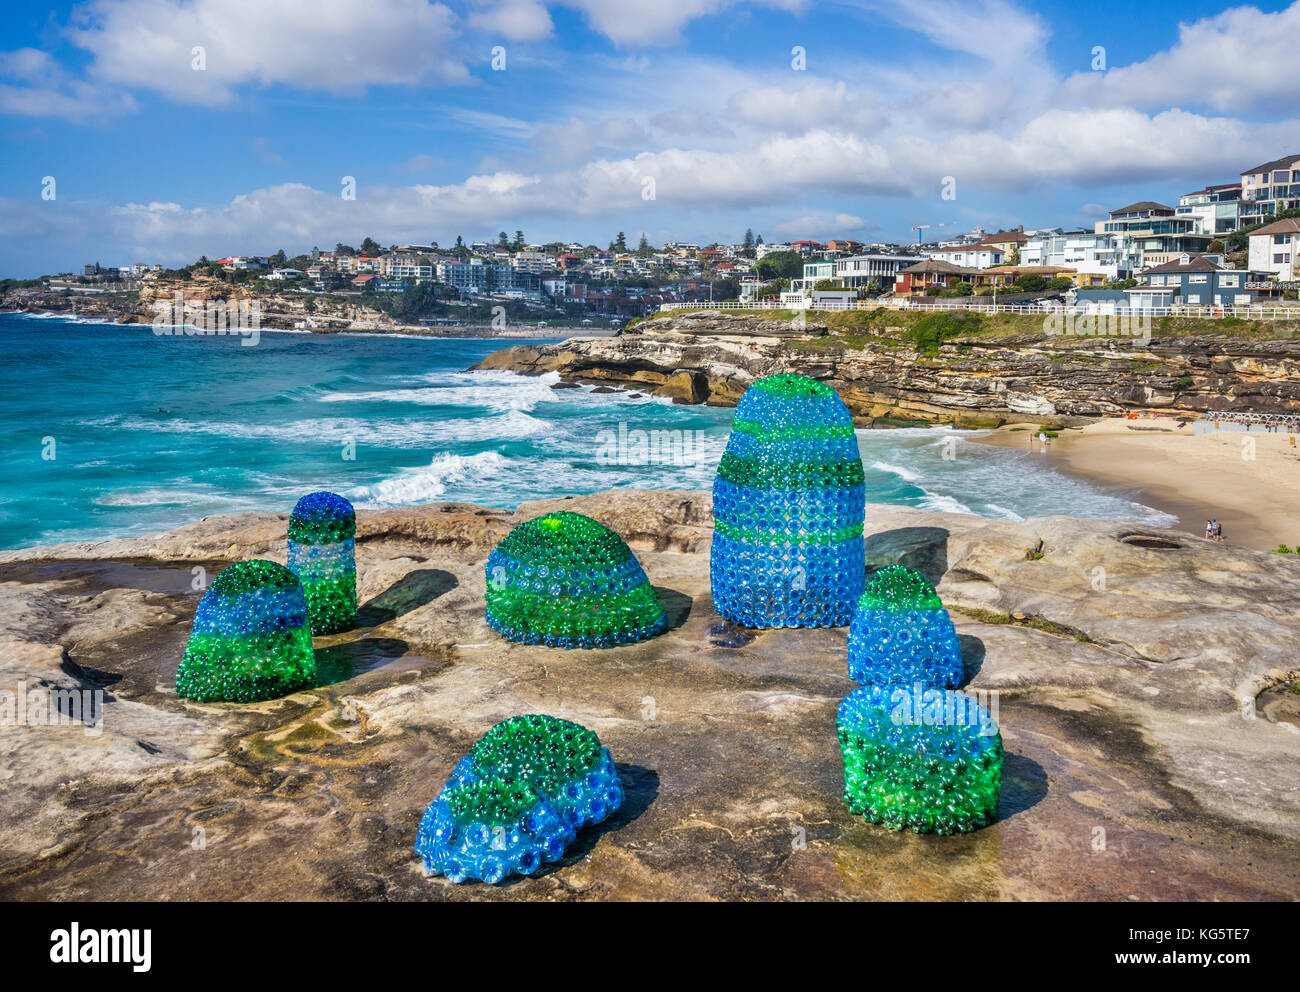 Sculpture by the sea 2017, annual exhibition on the coastal walk between Bondi and Tamara Beach, Sydney, New South Wales, Australia. Plastic recycle i Stock Photo